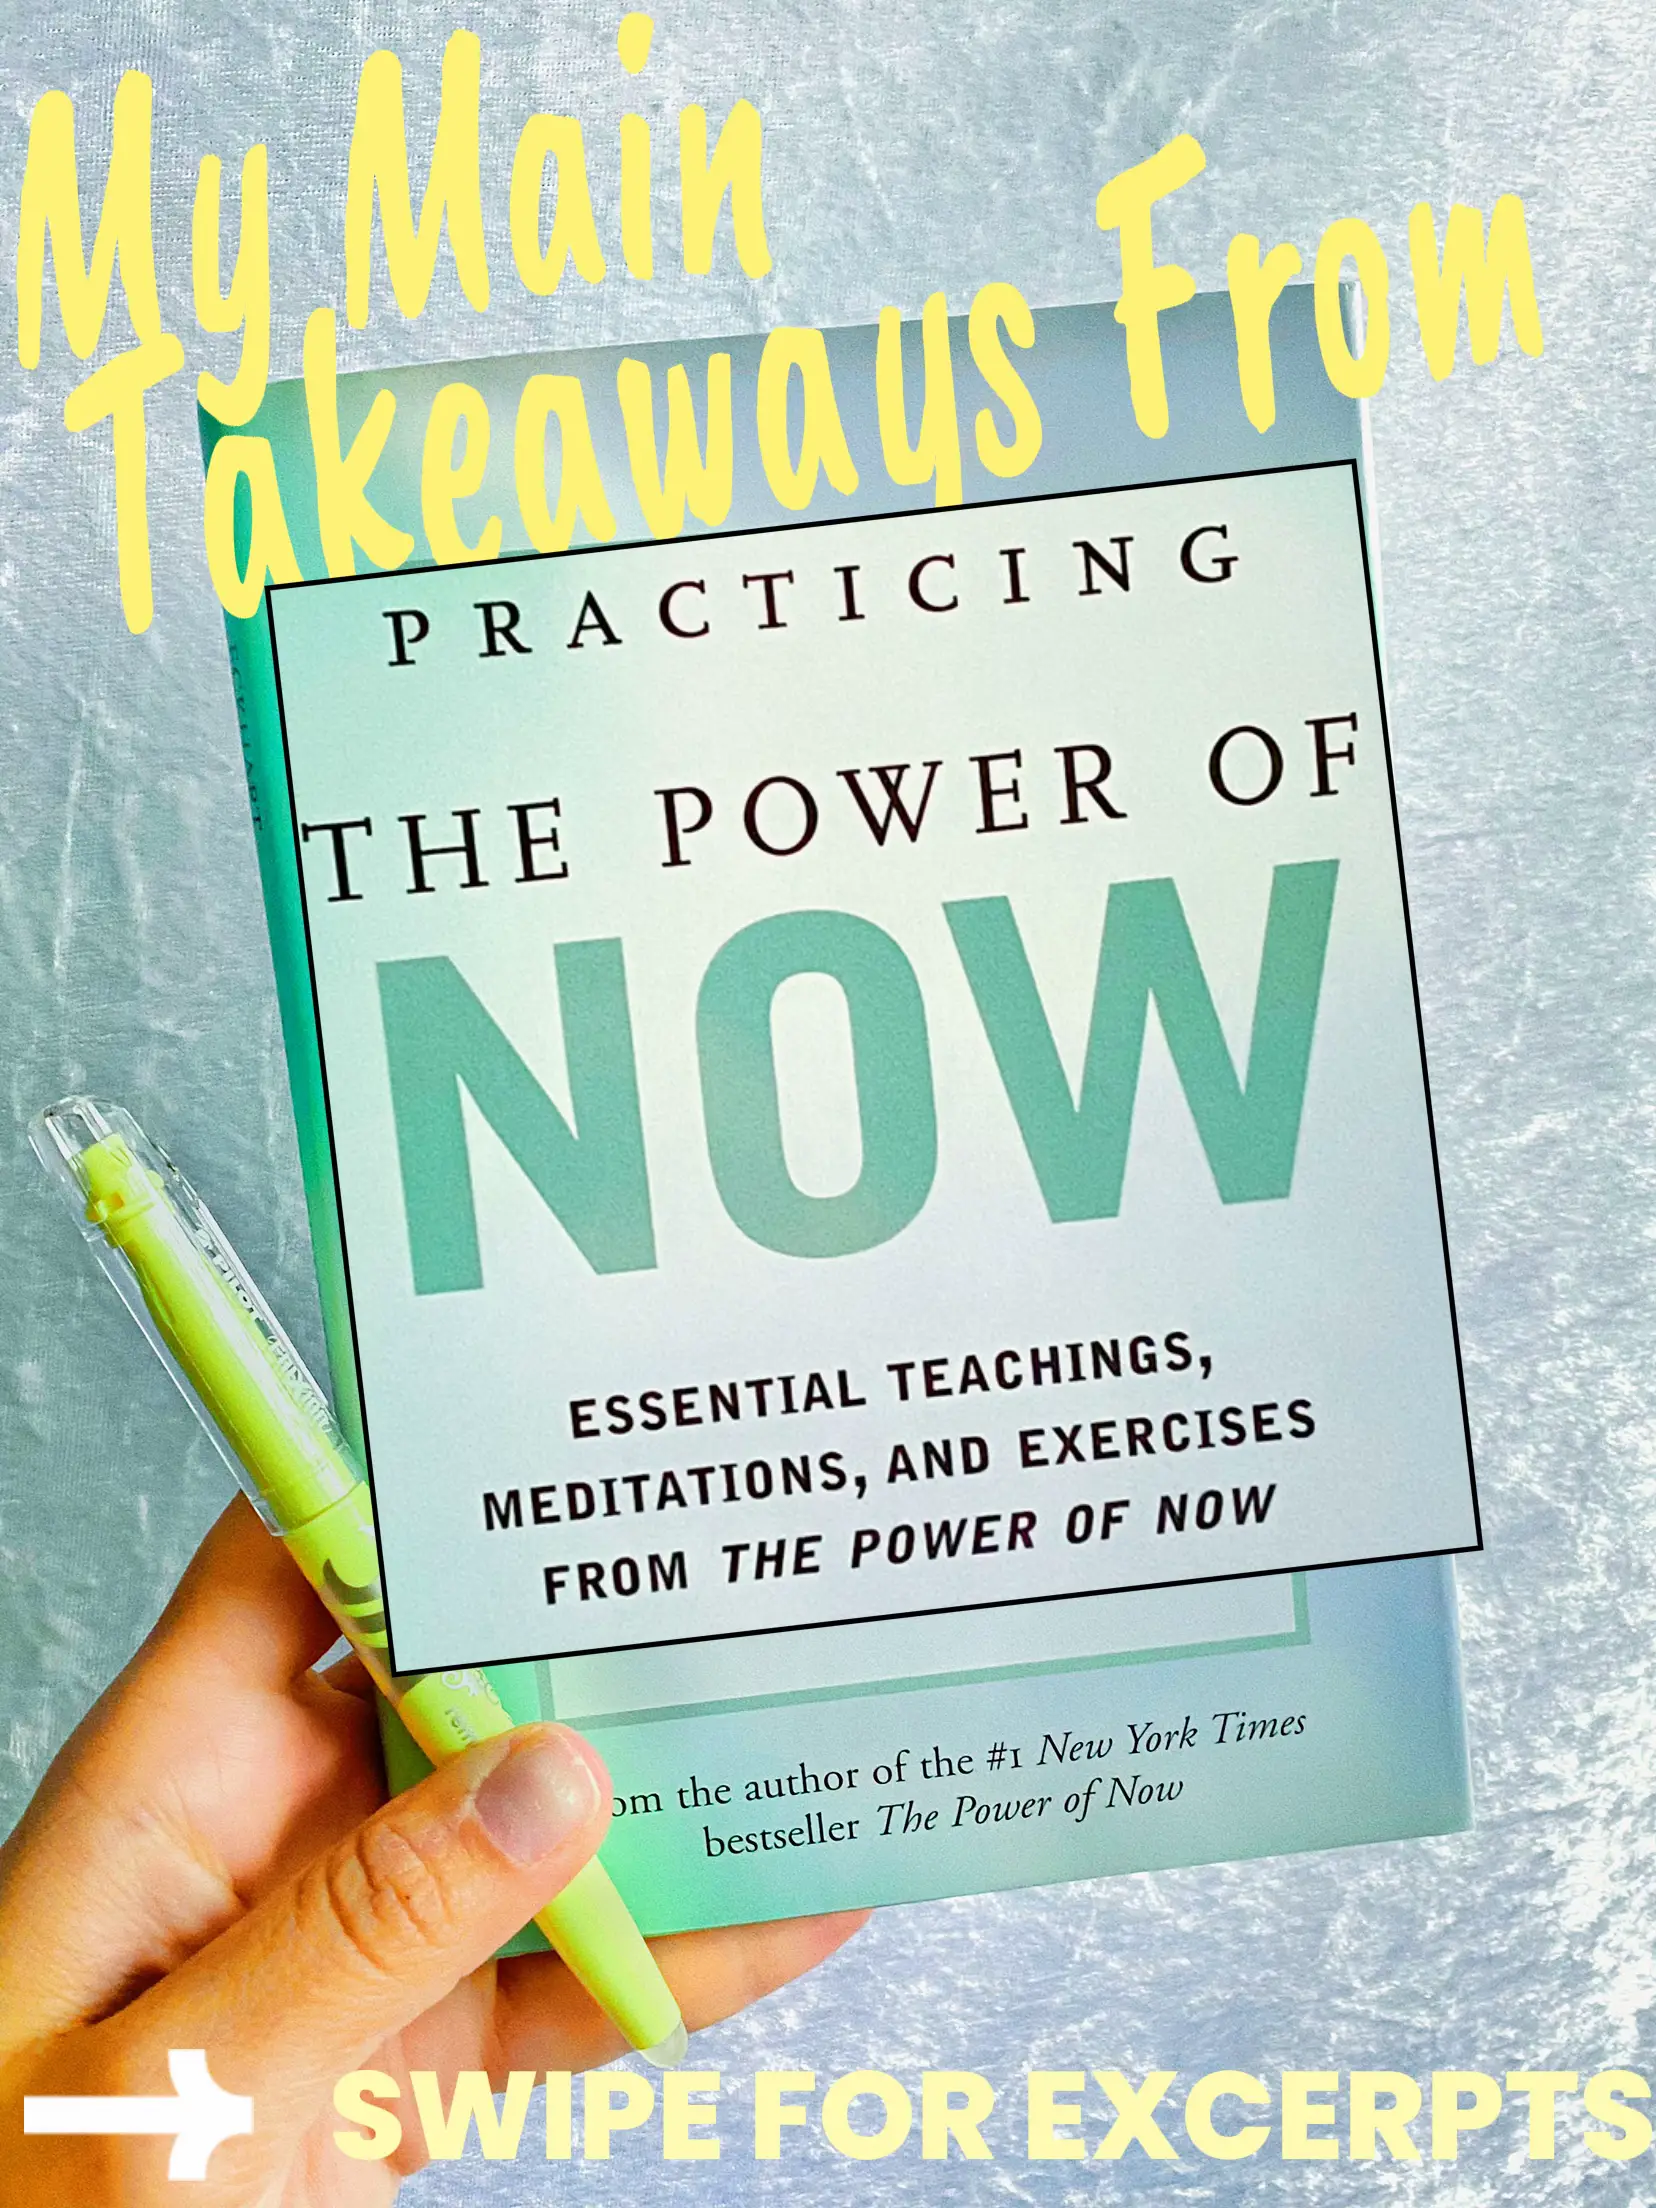 Excerpt: Practicing the Power of Now - Eckhart Tolle